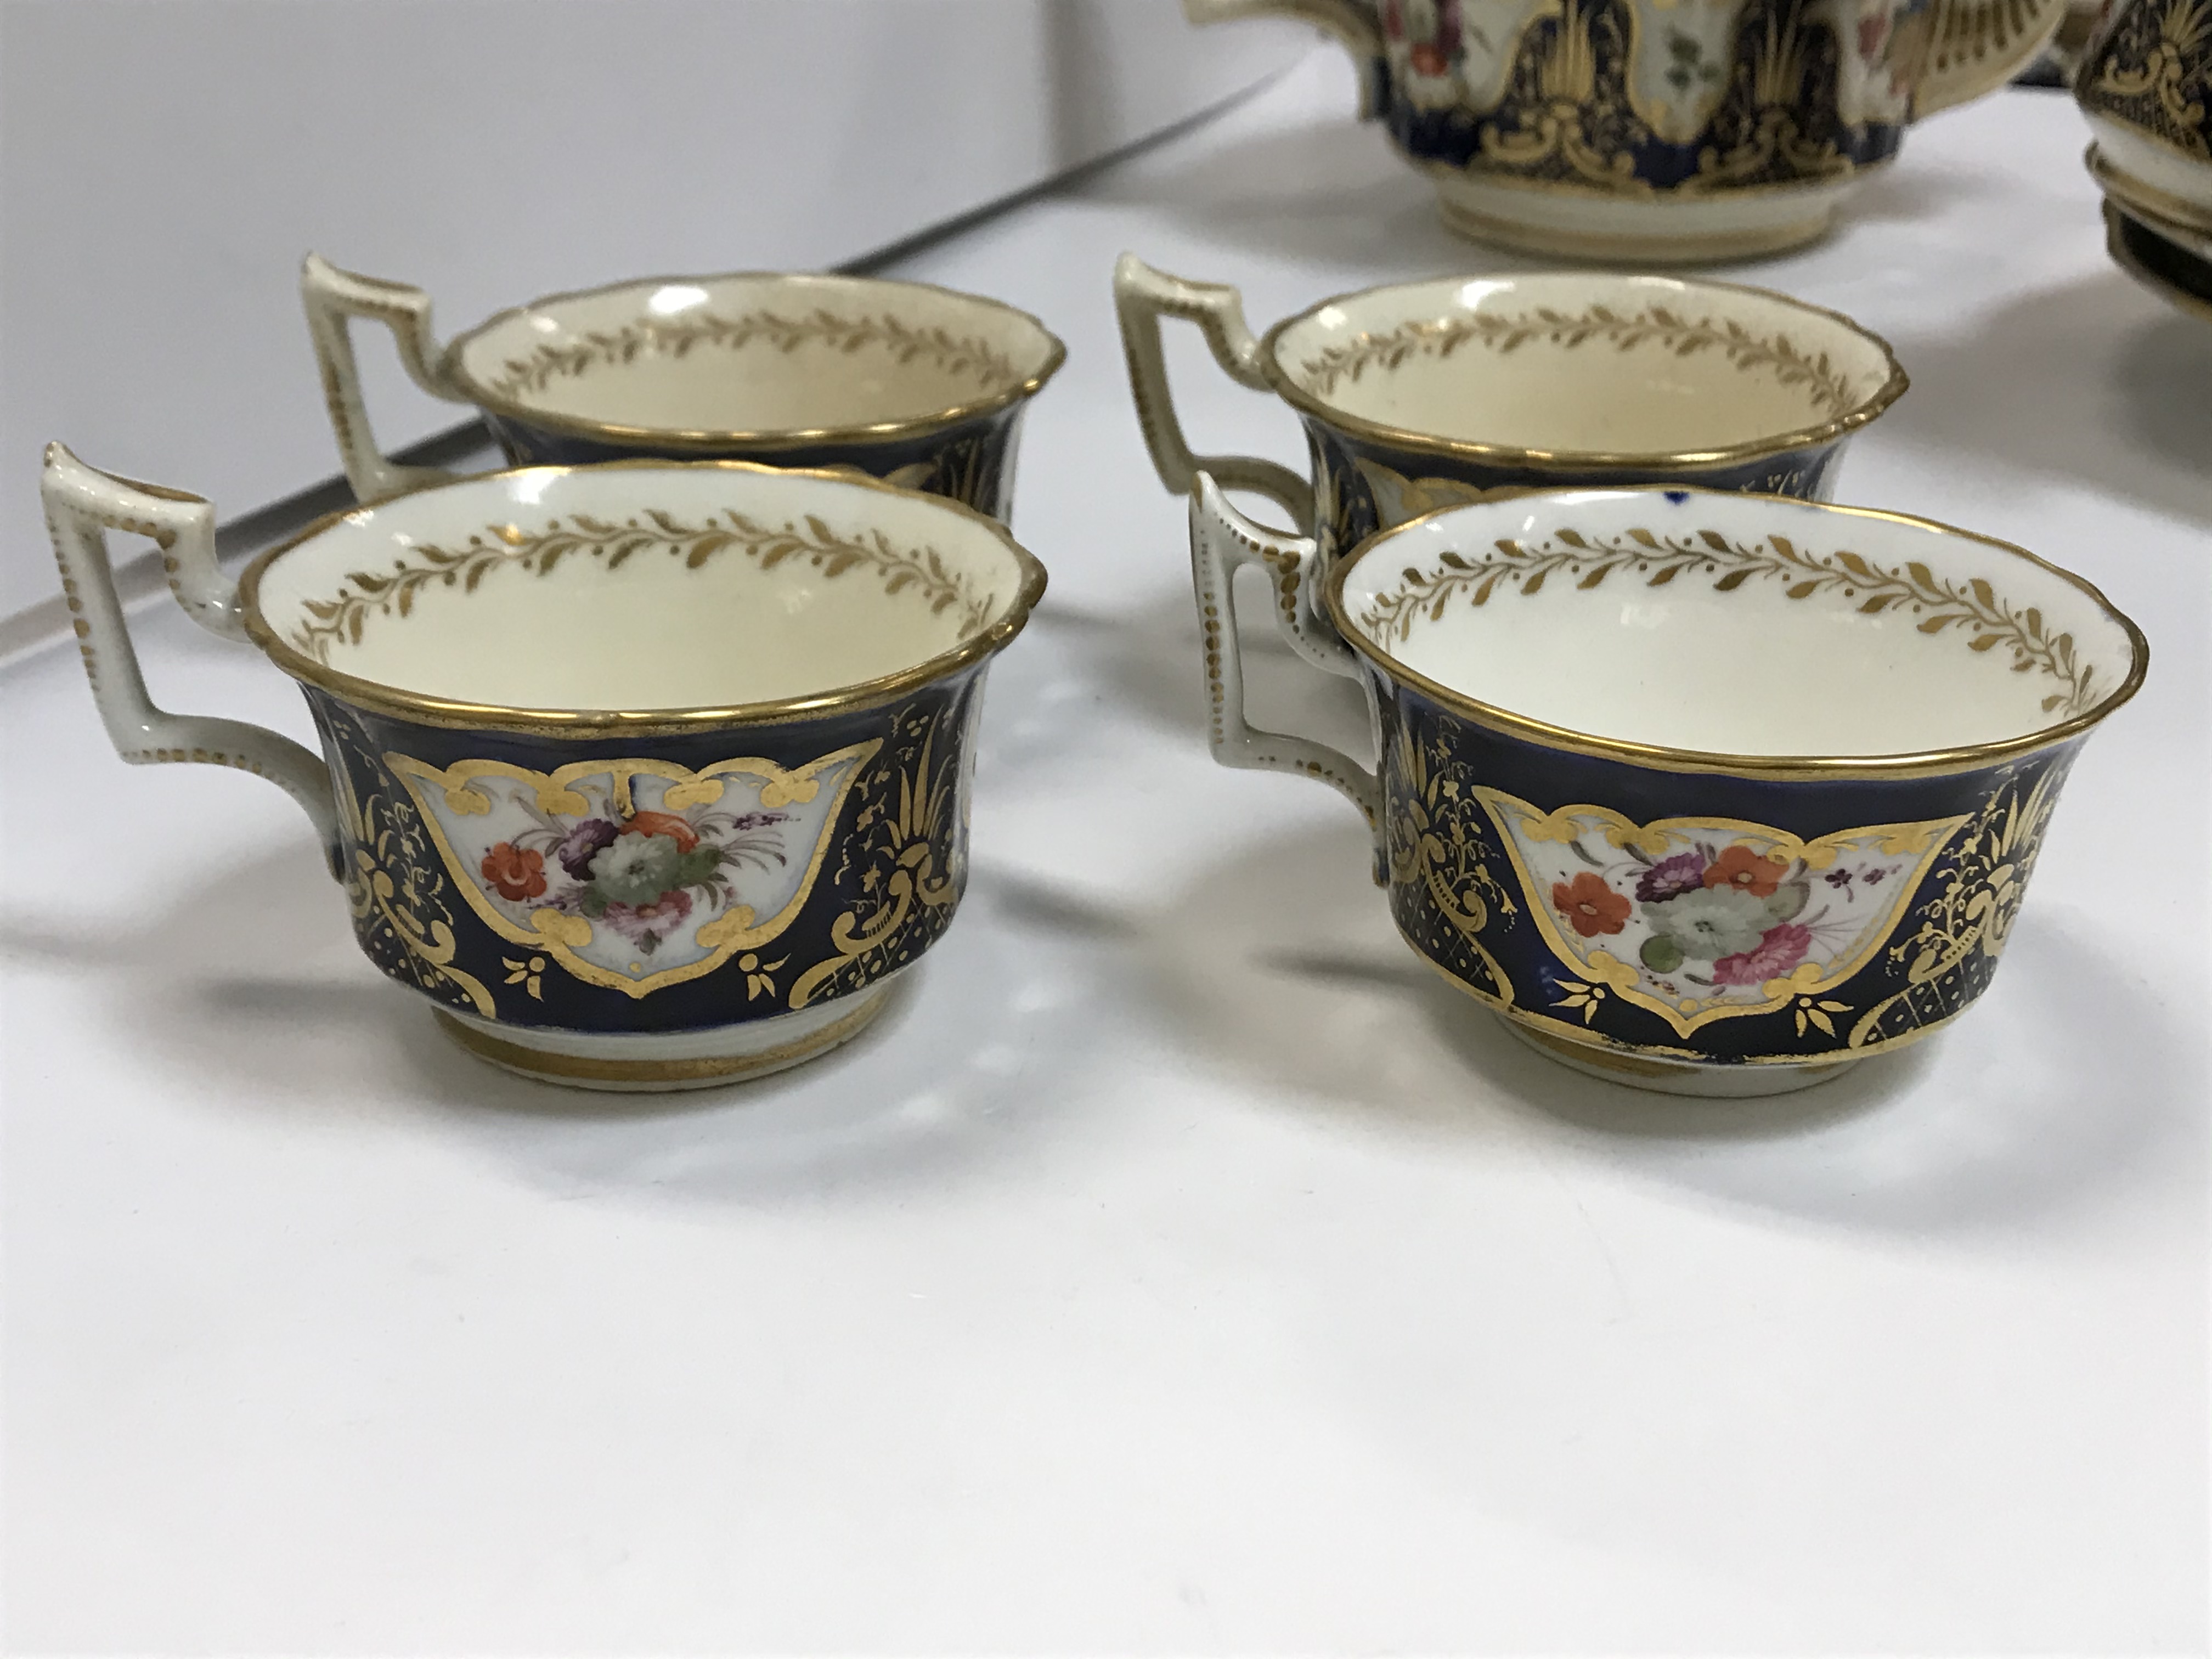 A 19th Century Staffordshire pottery part tea set, royal blue banded and gilt lined with panels of - Image 21 of 45